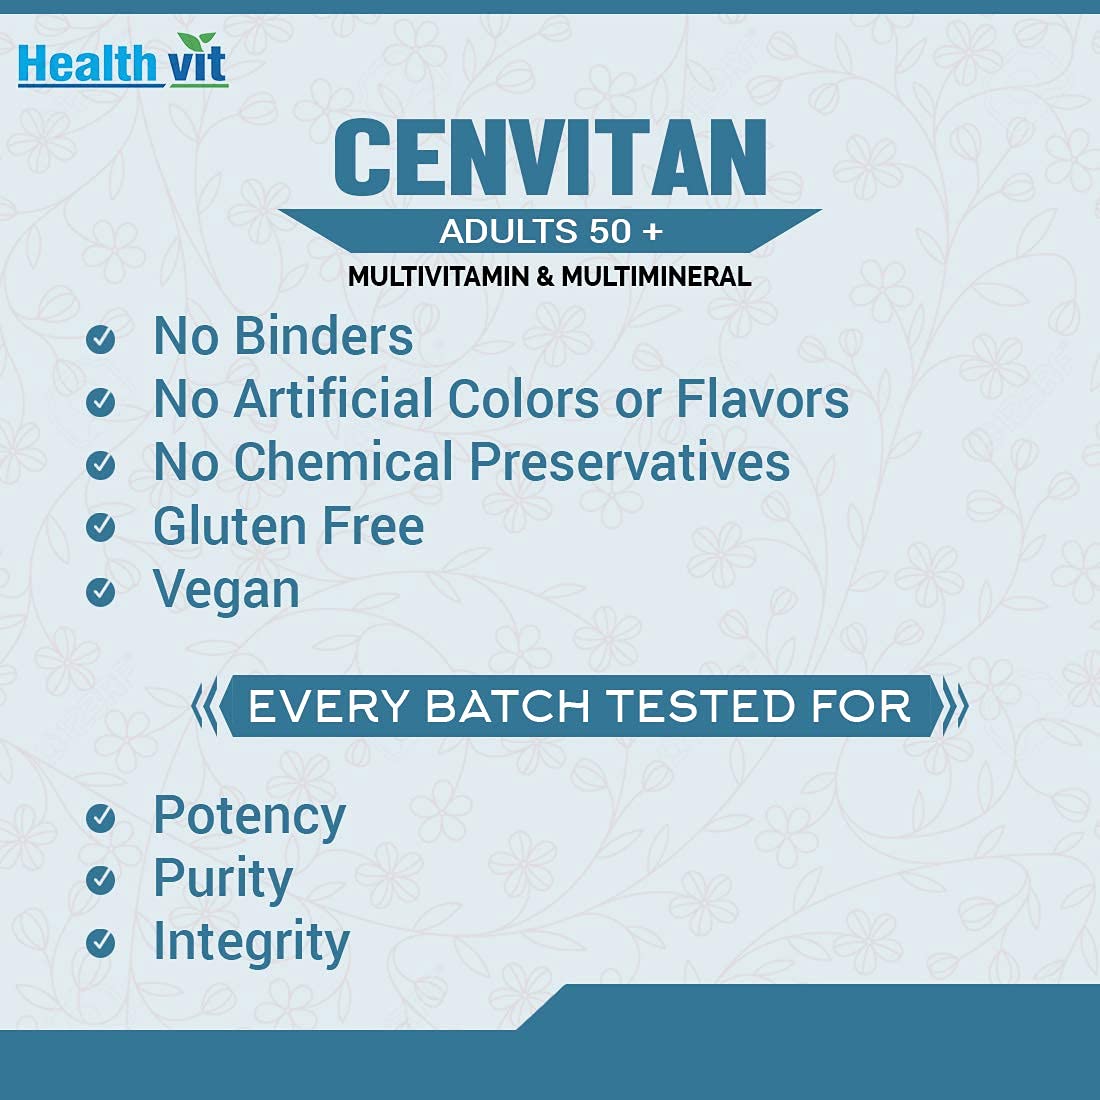 Healthvit Cenvitan Adults 50+ Multivitamin & Multimineral with 25 Nutrients (Vitamins and Minerals) | Eye Health, Heart Health, Brain Health and Whole Body Health - 60 Tablets (Pack of 2)